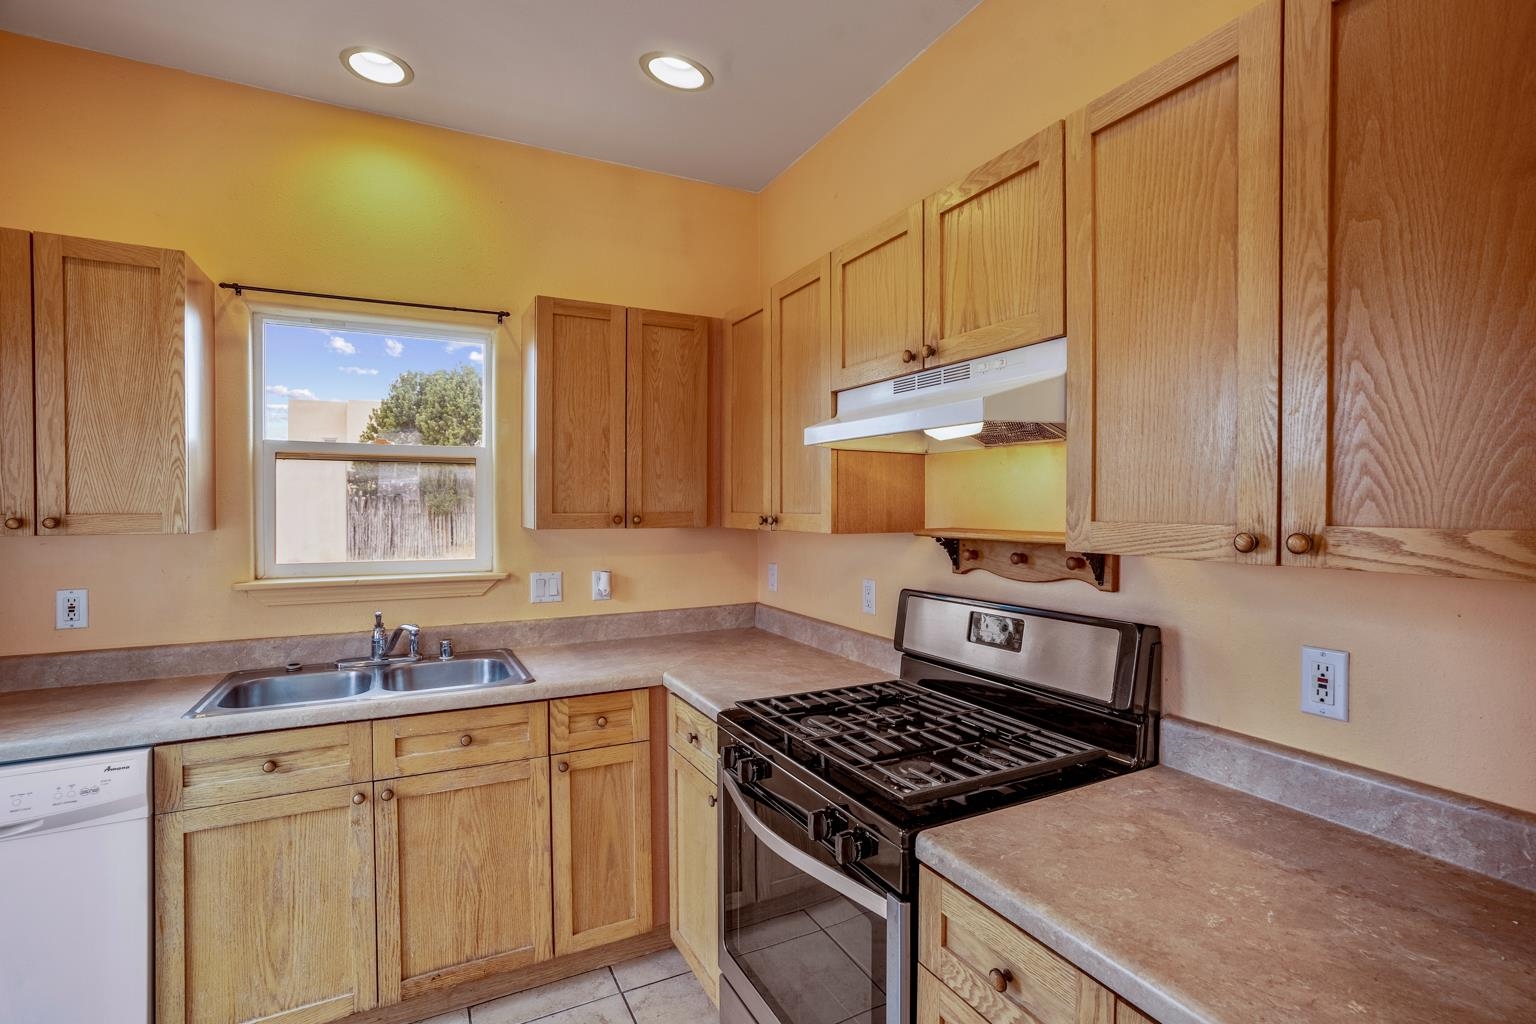 4342 Lost Feather, Santa Fe, New Mexico 87507, 3 Bedrooms Bedrooms, ,2 BathroomsBathrooms,Residential,For Sale,4342 Lost Feather,202200687